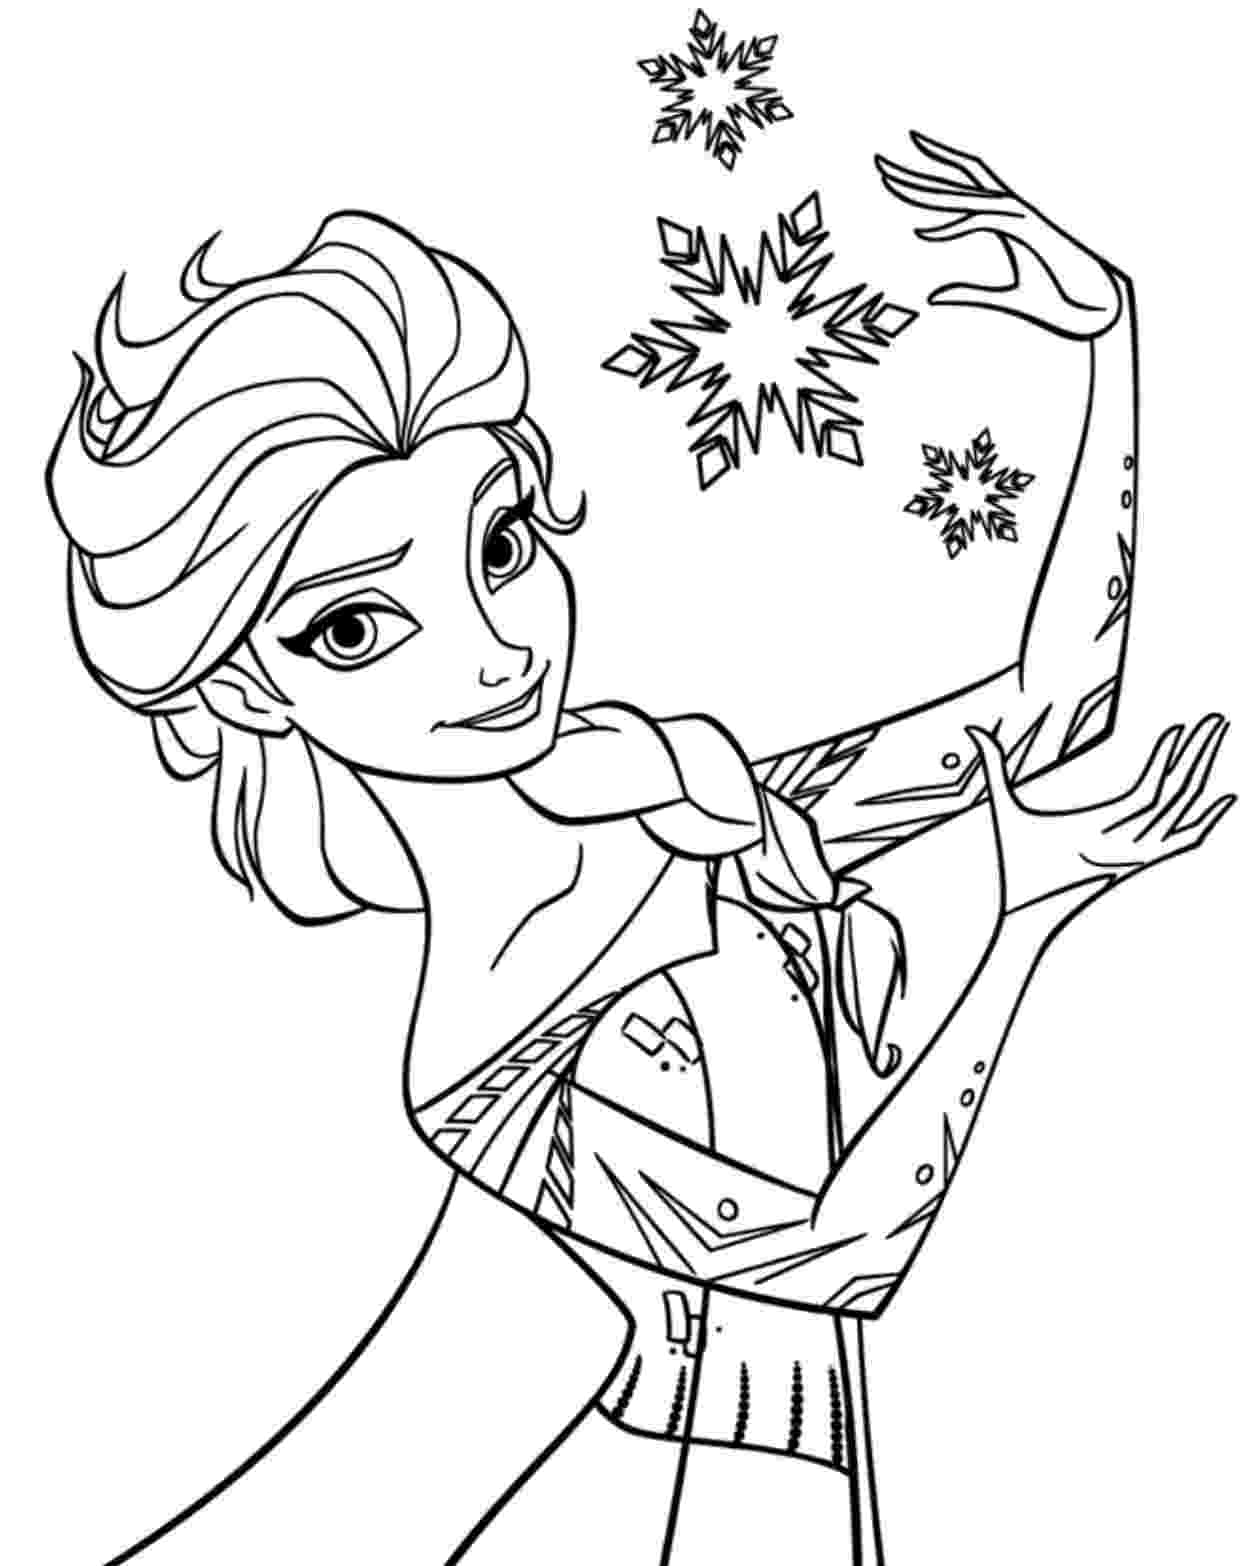 anna and elsa pictures to color coloring pages coloring elsa and anna frozen fever paper pictures anna to and elsa color 